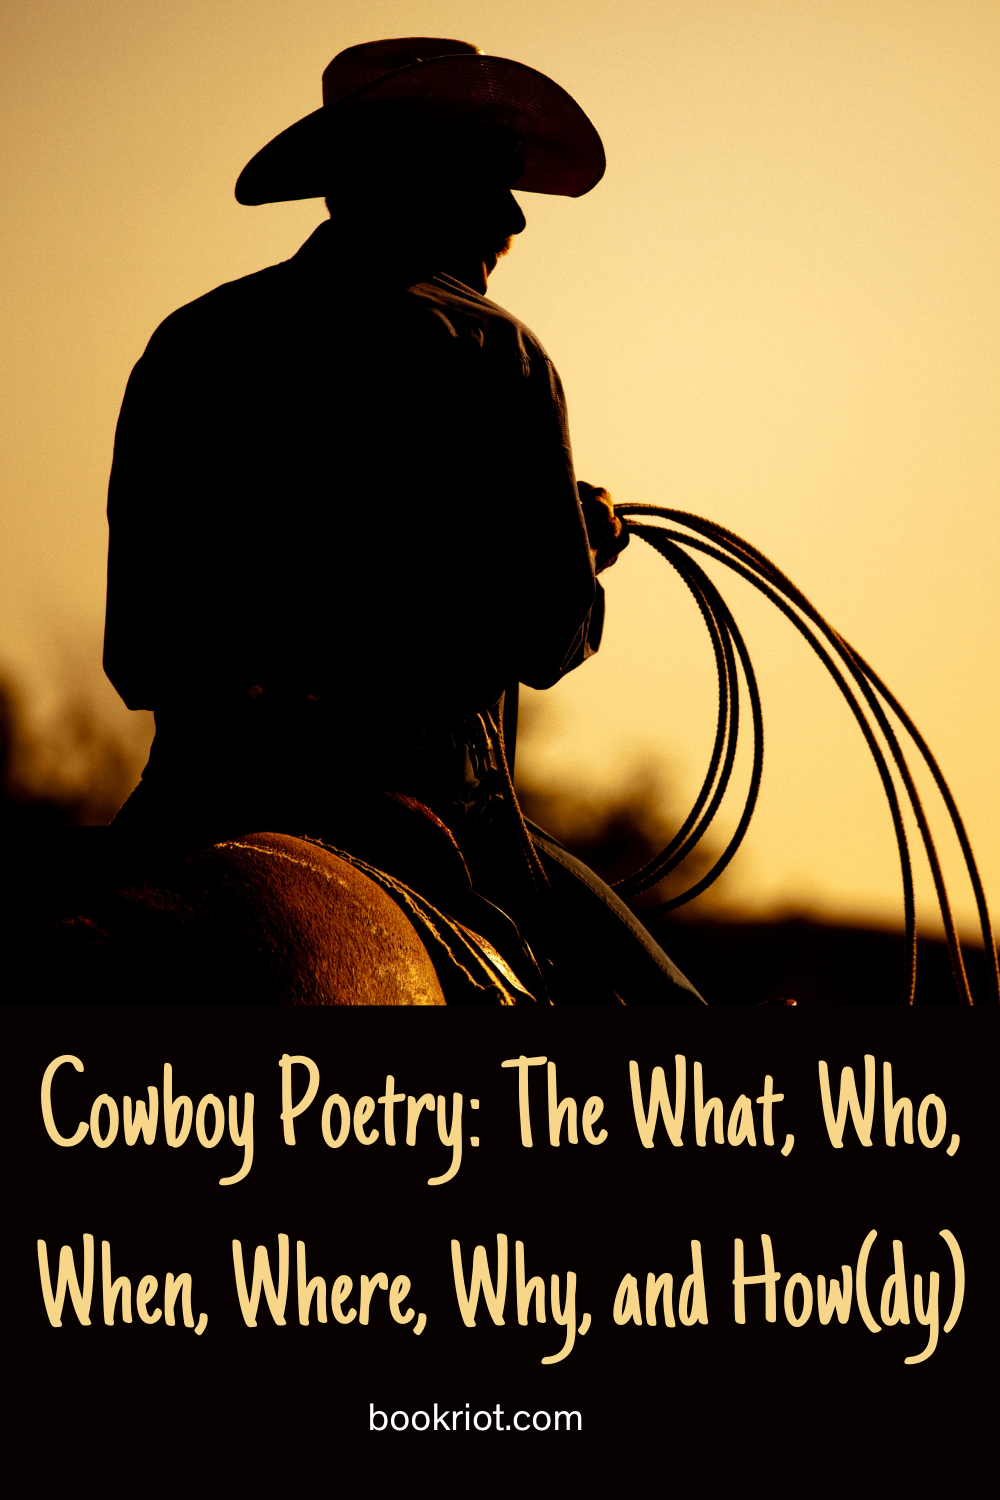 Cowboy Poetry The What, Who, When, Where, Why, and How(dy)